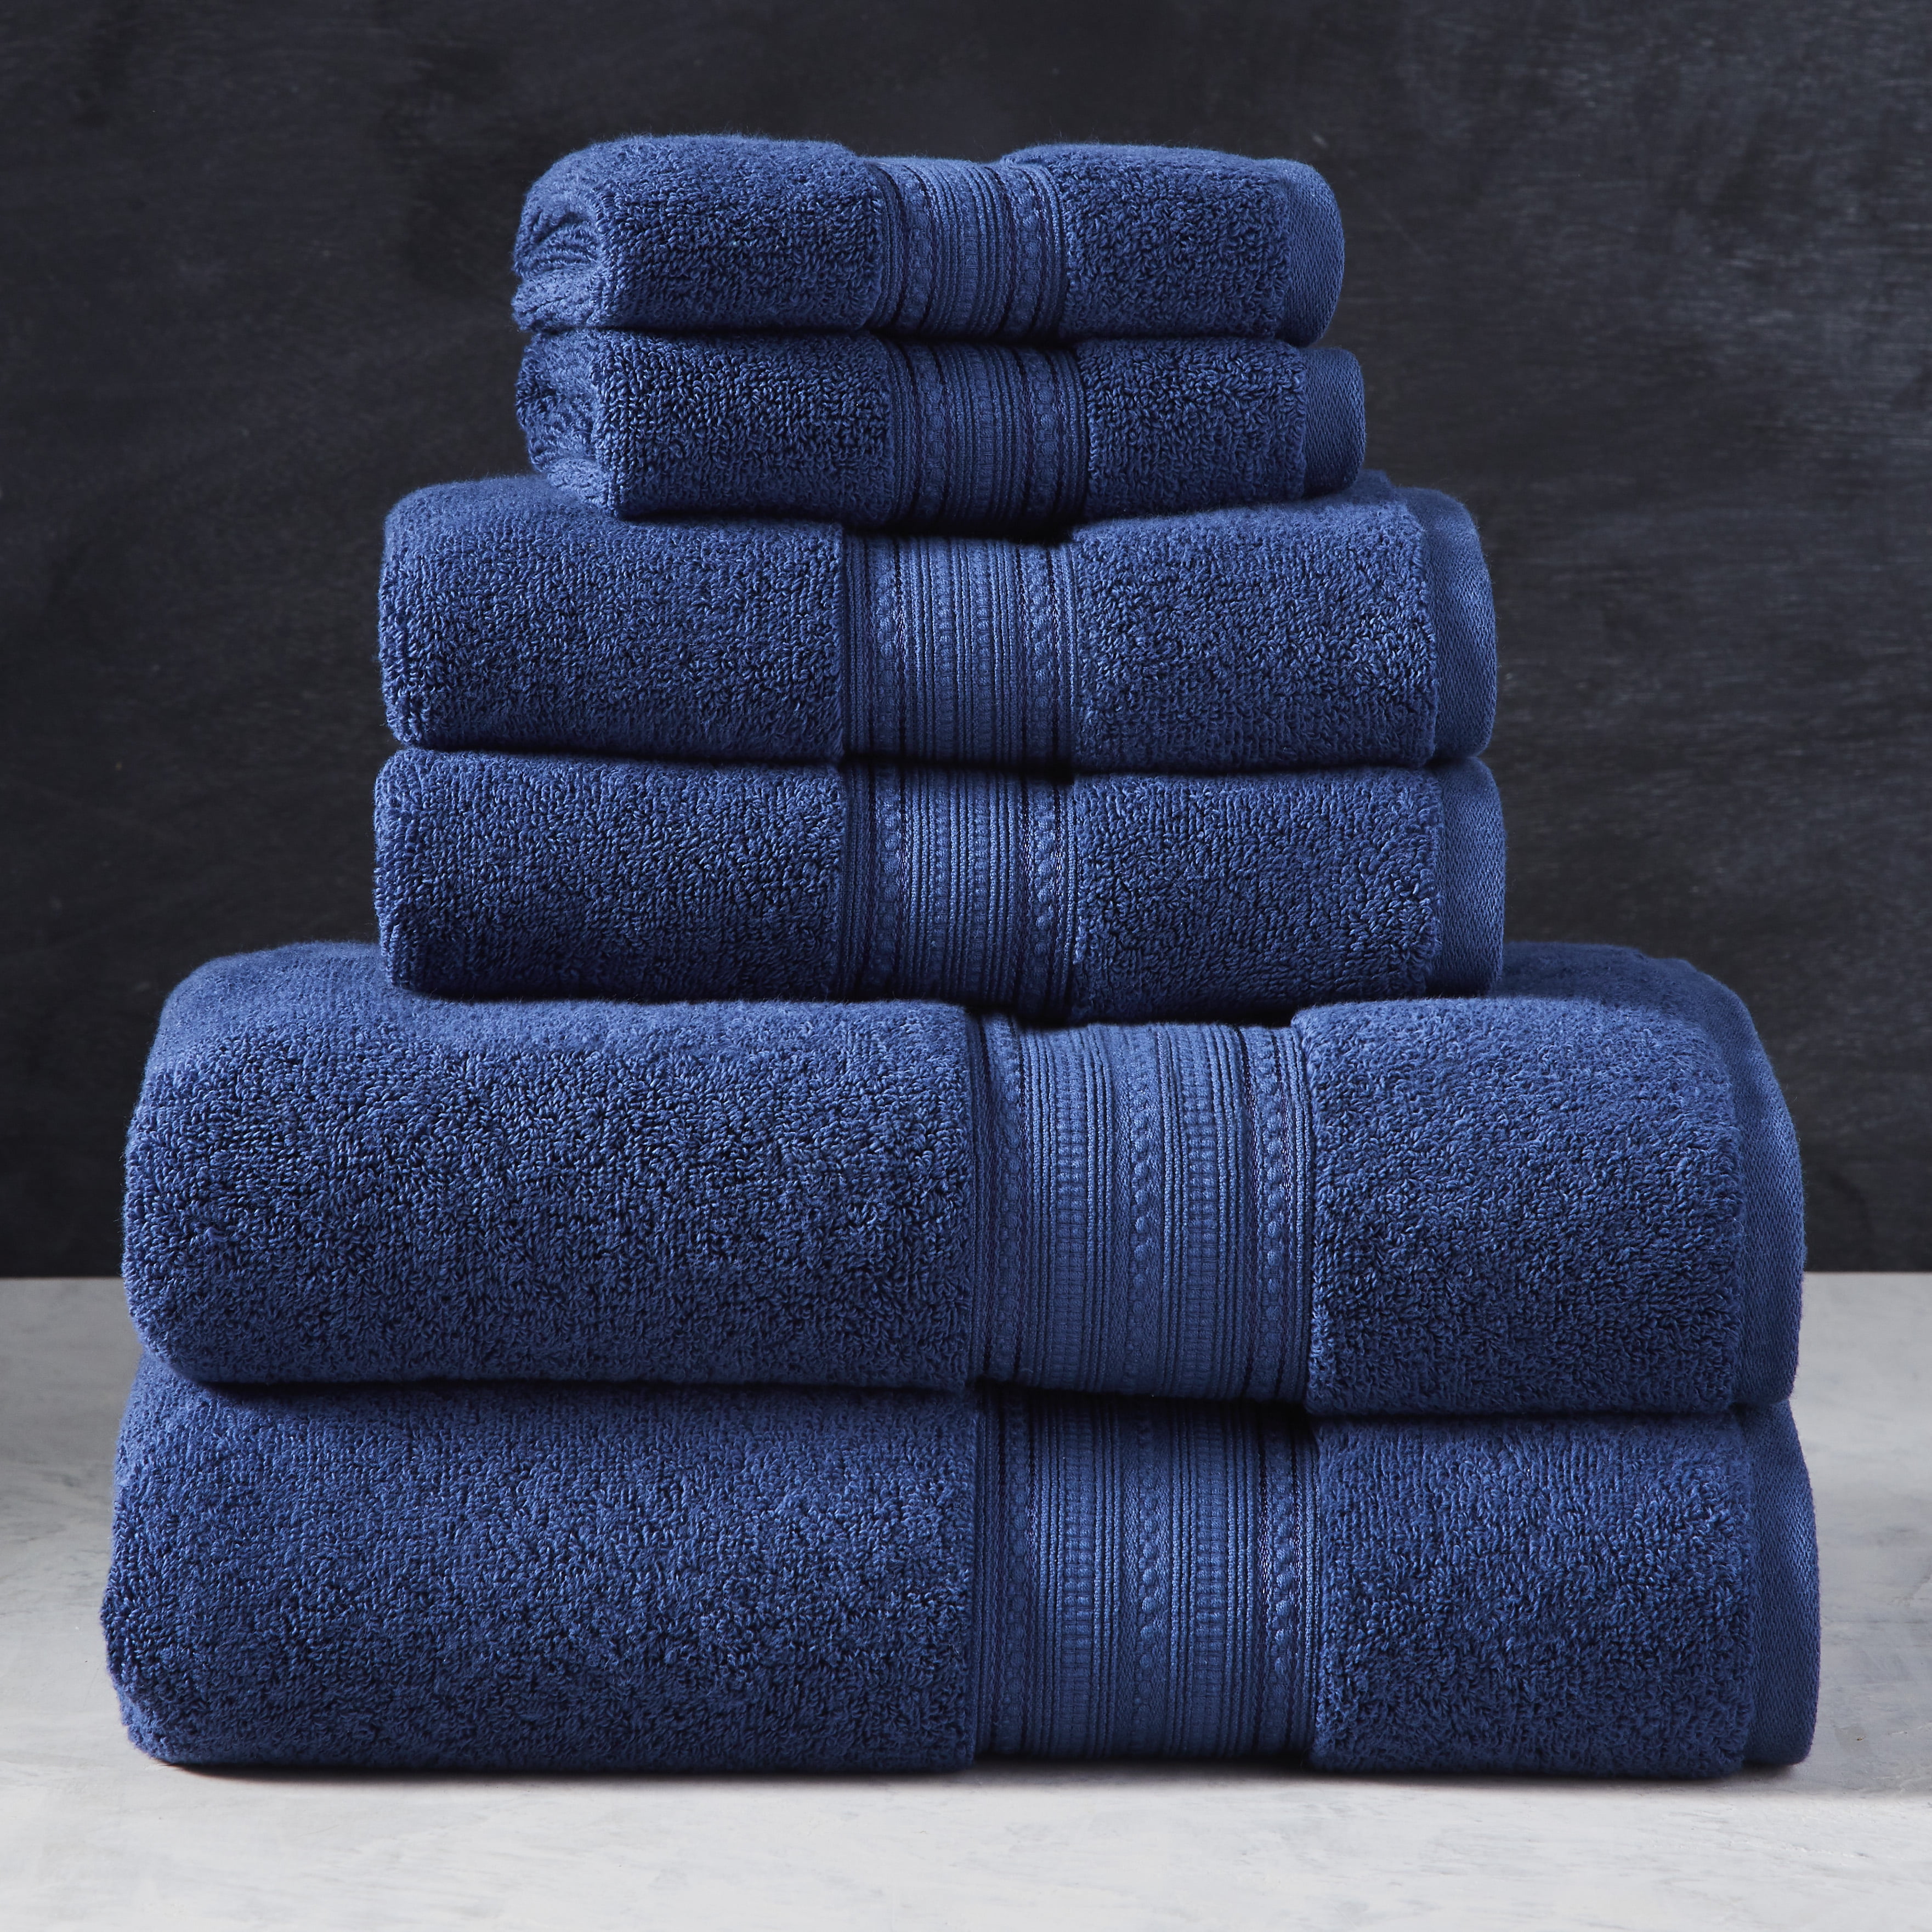 Zenith Bath Towel in Assorted Colors Design by Turkish Towel Company Color: Slate Blue